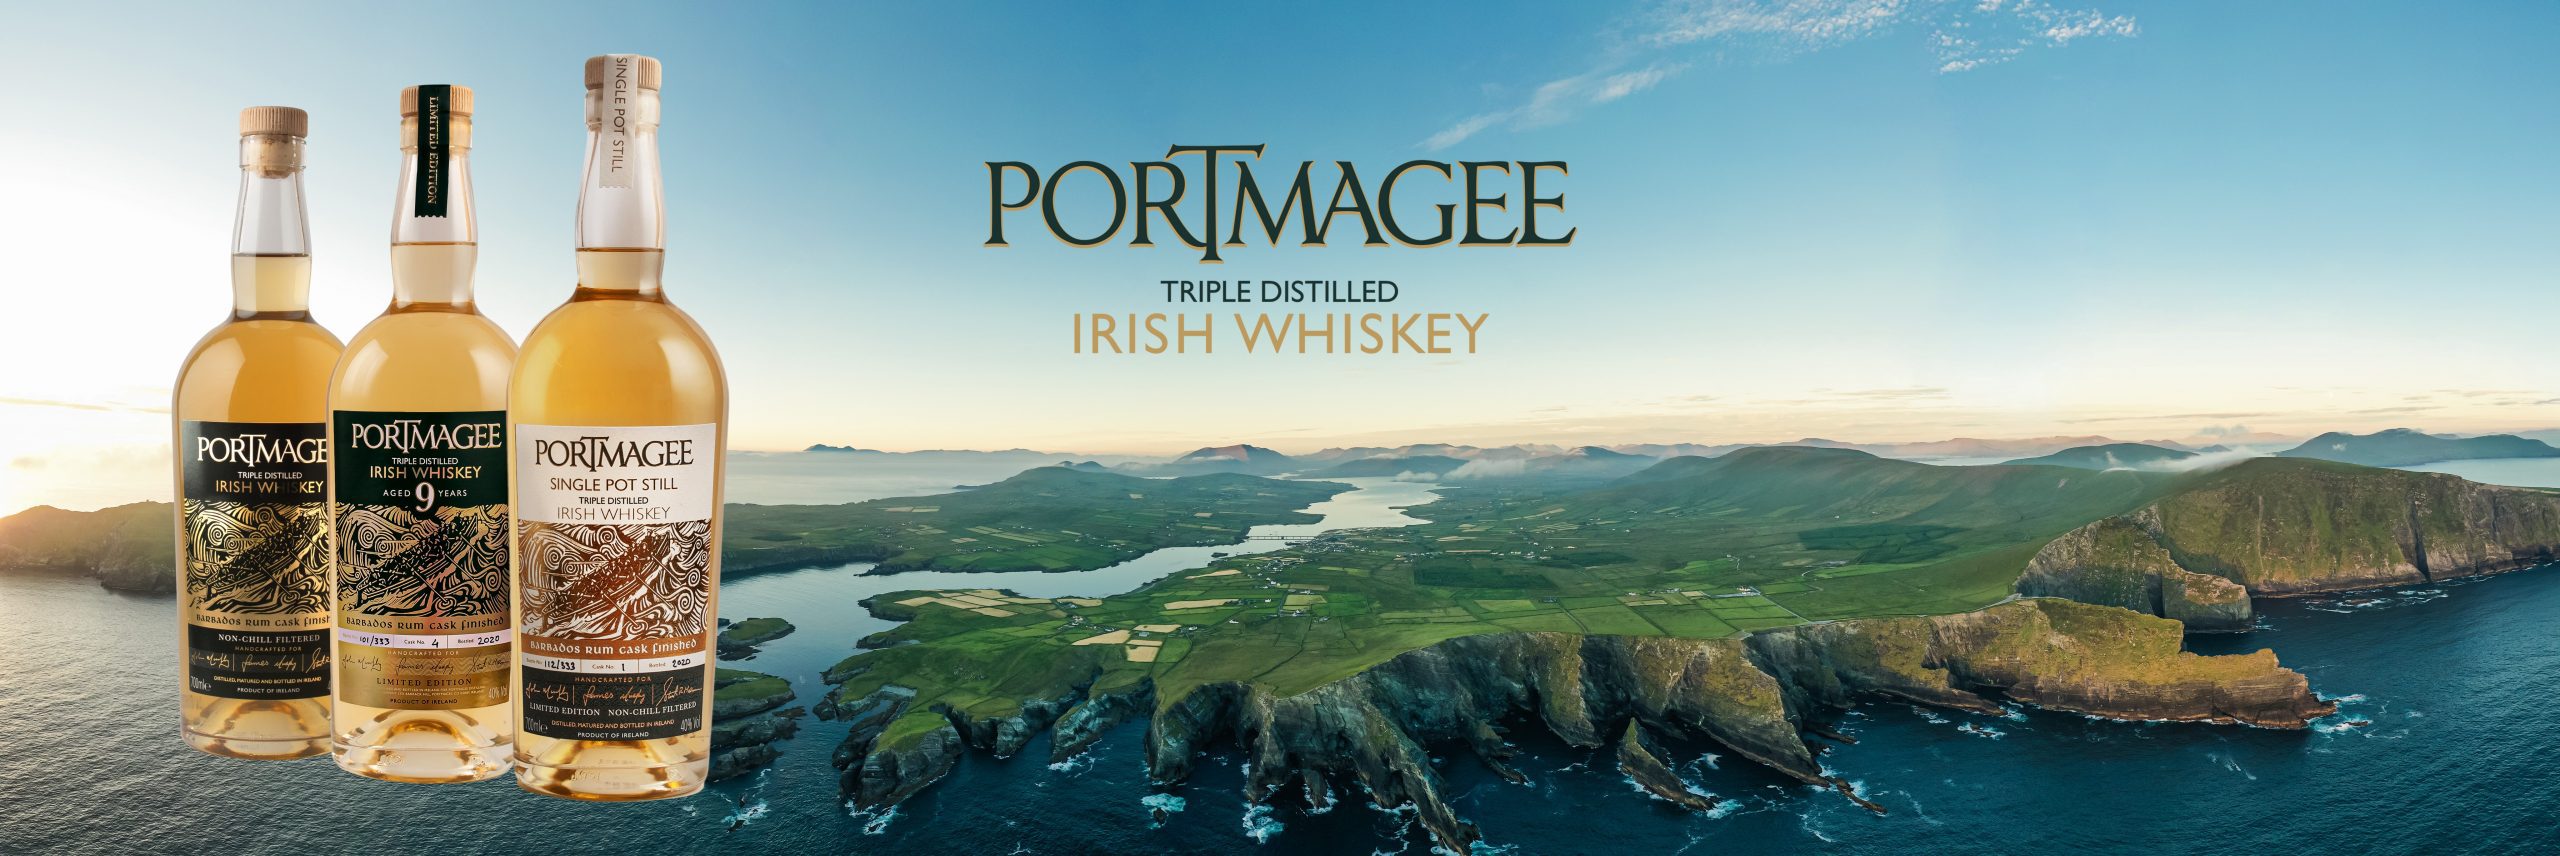 Portmagee Whiskey is one or the very best Irish Whiskeys. Limited Single Cask release, Triple Distilled, No added colour,single cask married, Barbados Rum Cask Finished Irish Whiskey from Portmagee Irish Whiskey.